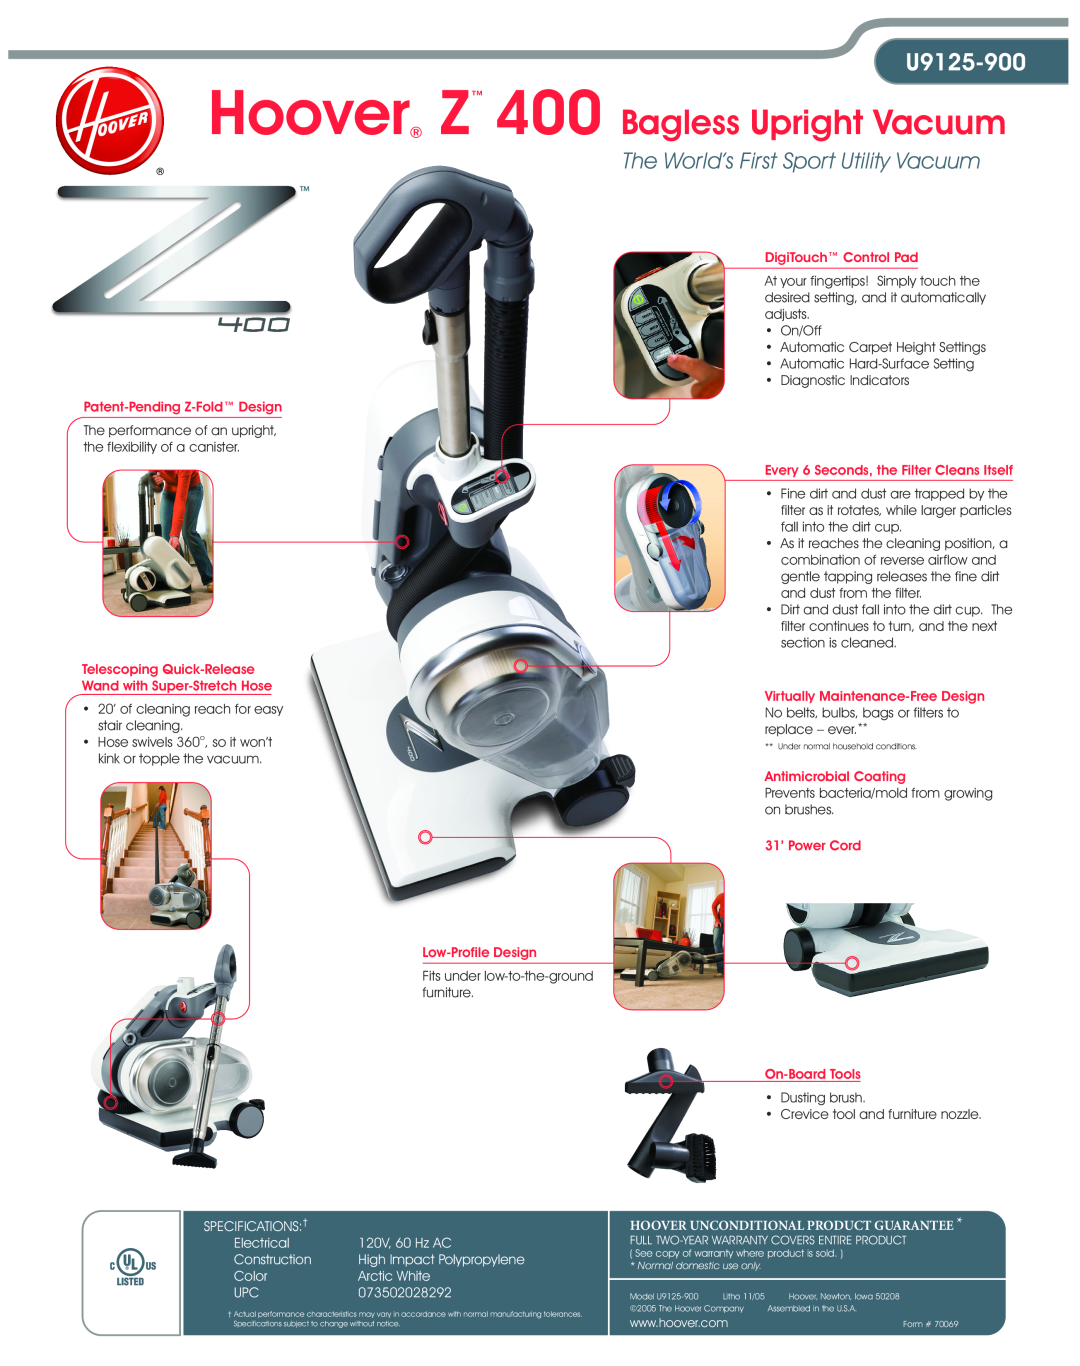 Hoover Hoover Z 400 Bagless Upright Vacuum, Every 6 Seconds, the Filter Cleans Itself, Antimicrobial Coating, U9125-900 